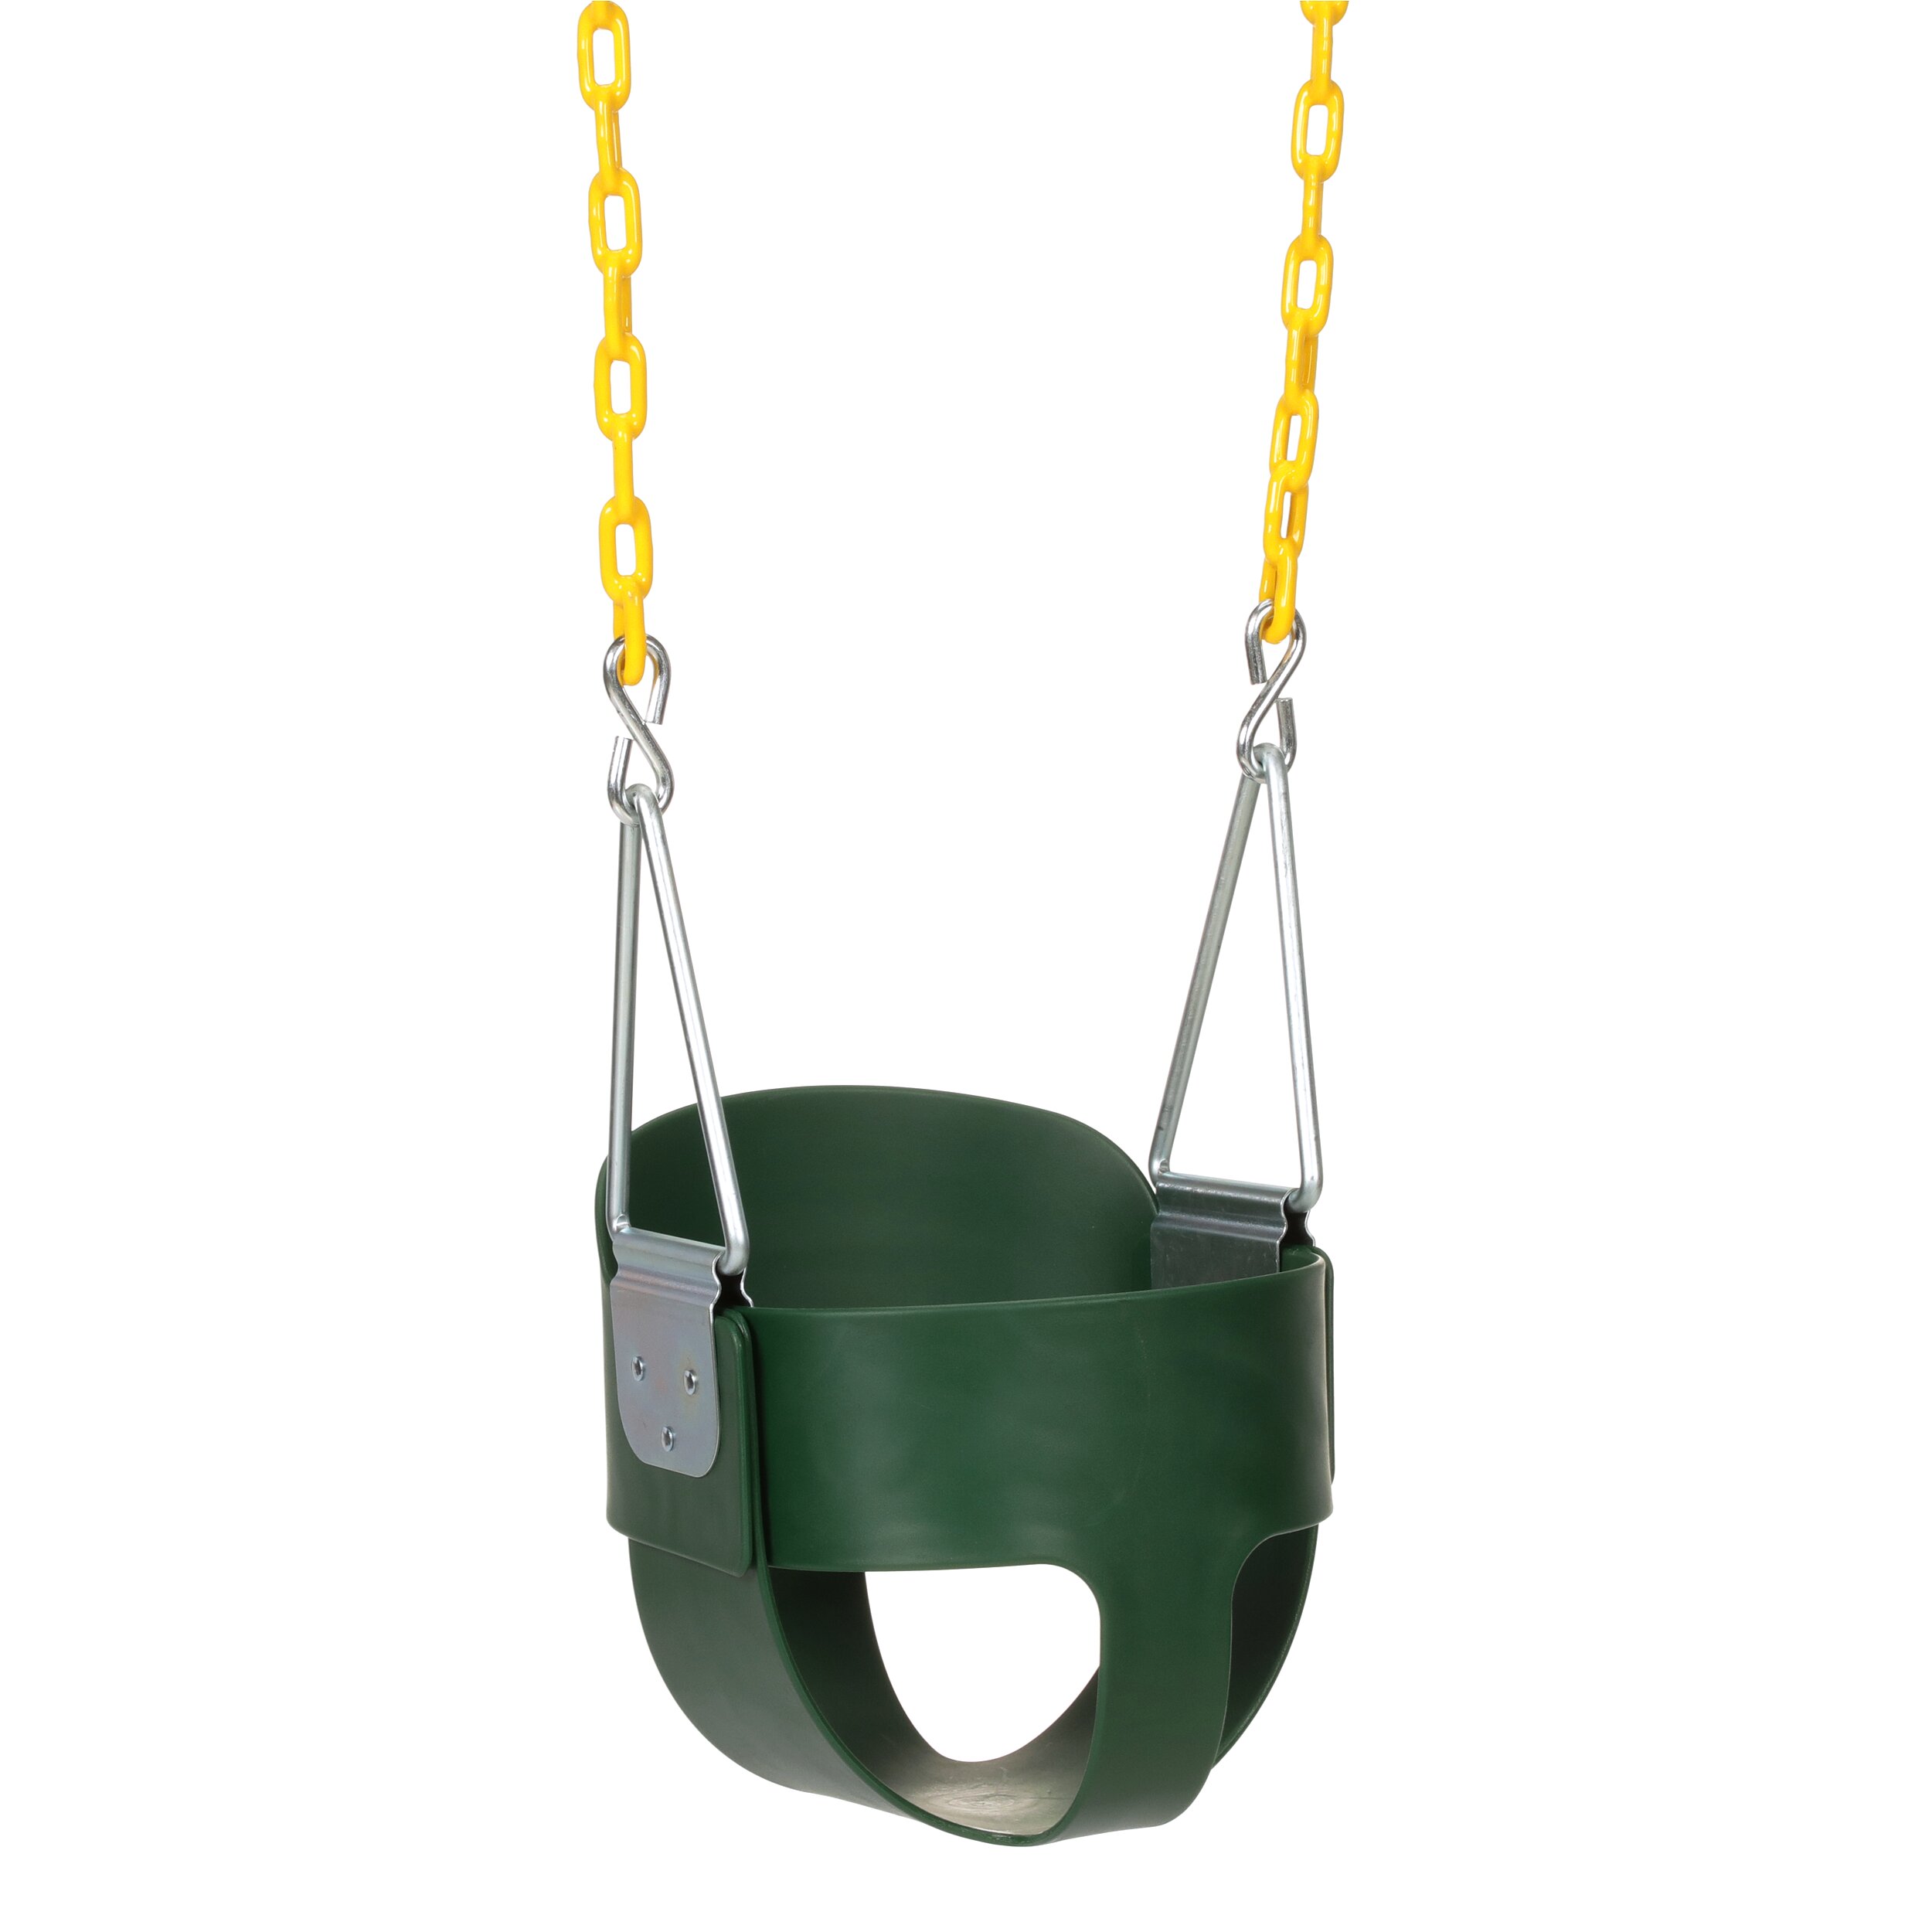 Eastern Jungle Gym Sling Swing With Coated Chain Green for sale online 